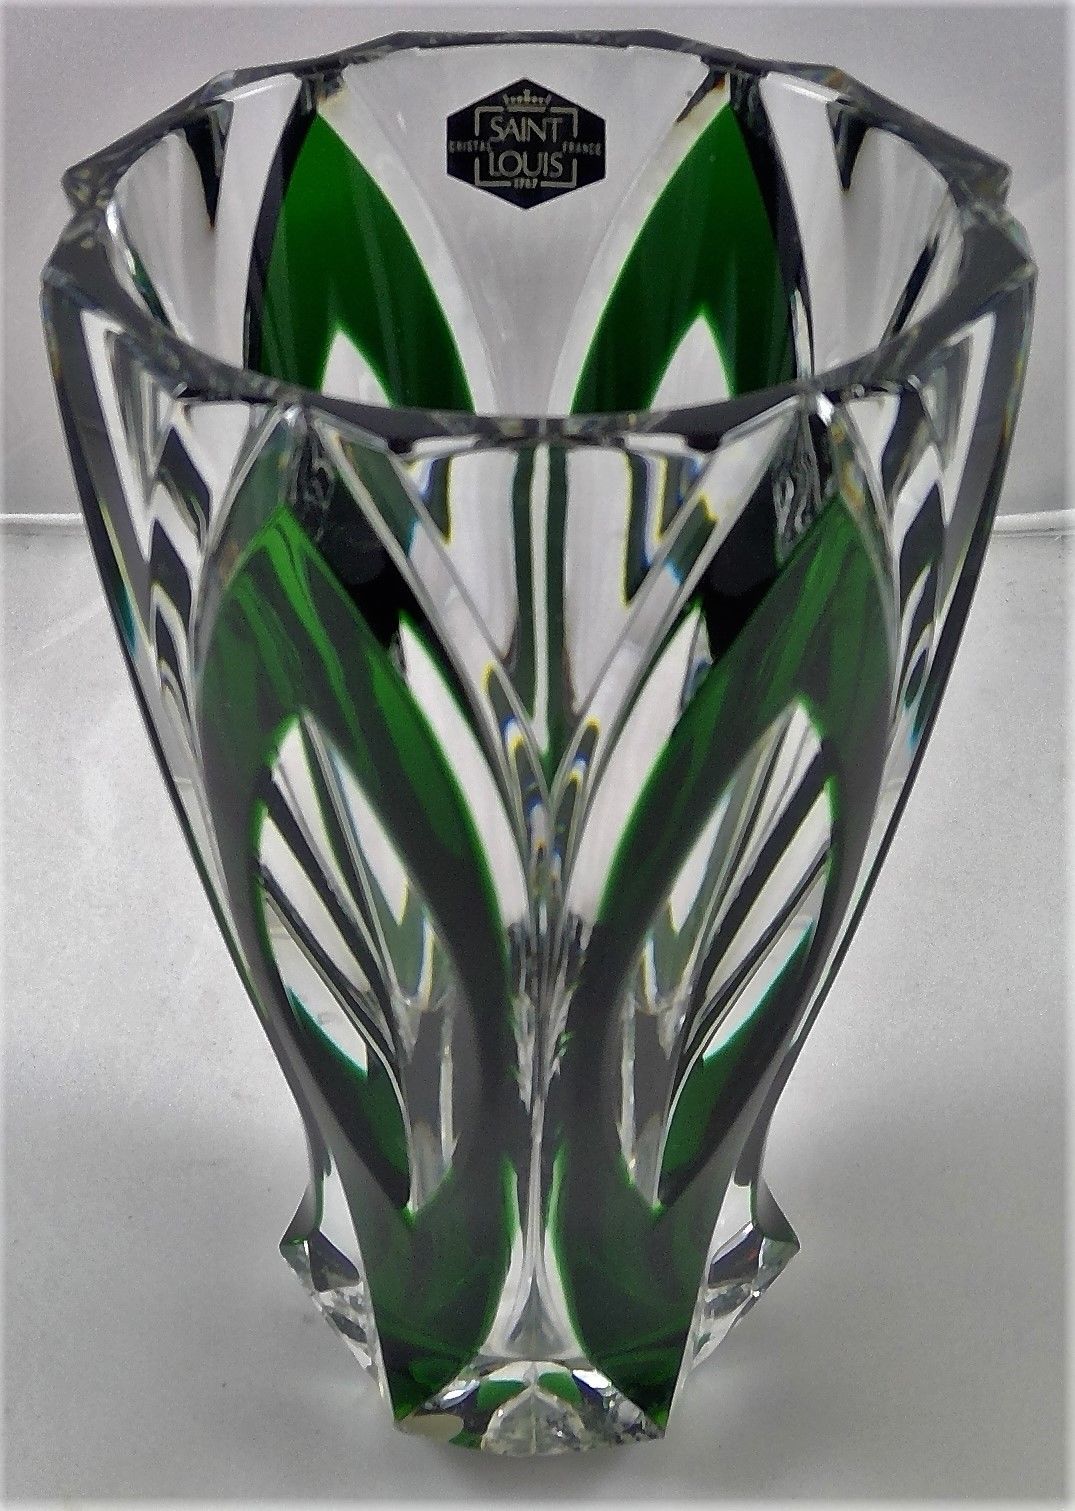 Saint Louis French Crystal Art Deco 1930-1940's Green cut to Clear 7" - 4" Vase